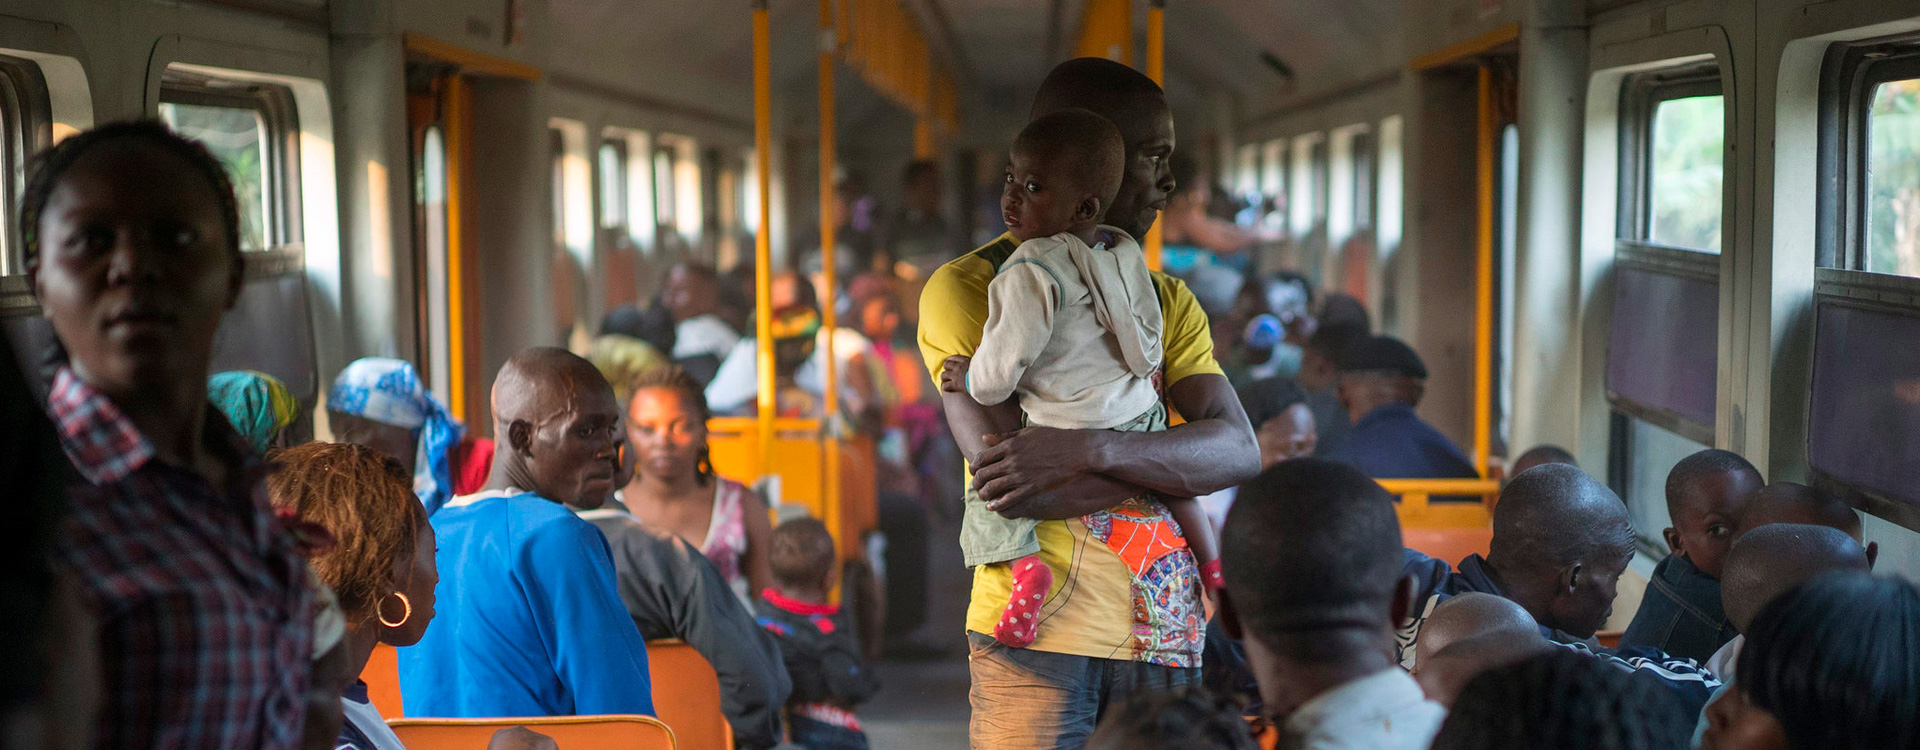 Angolan refugees, some of whom had been living in exile in the Democratic Republic of Congo for up to 40 years, journey back to their homeland by train from Kinshasa.